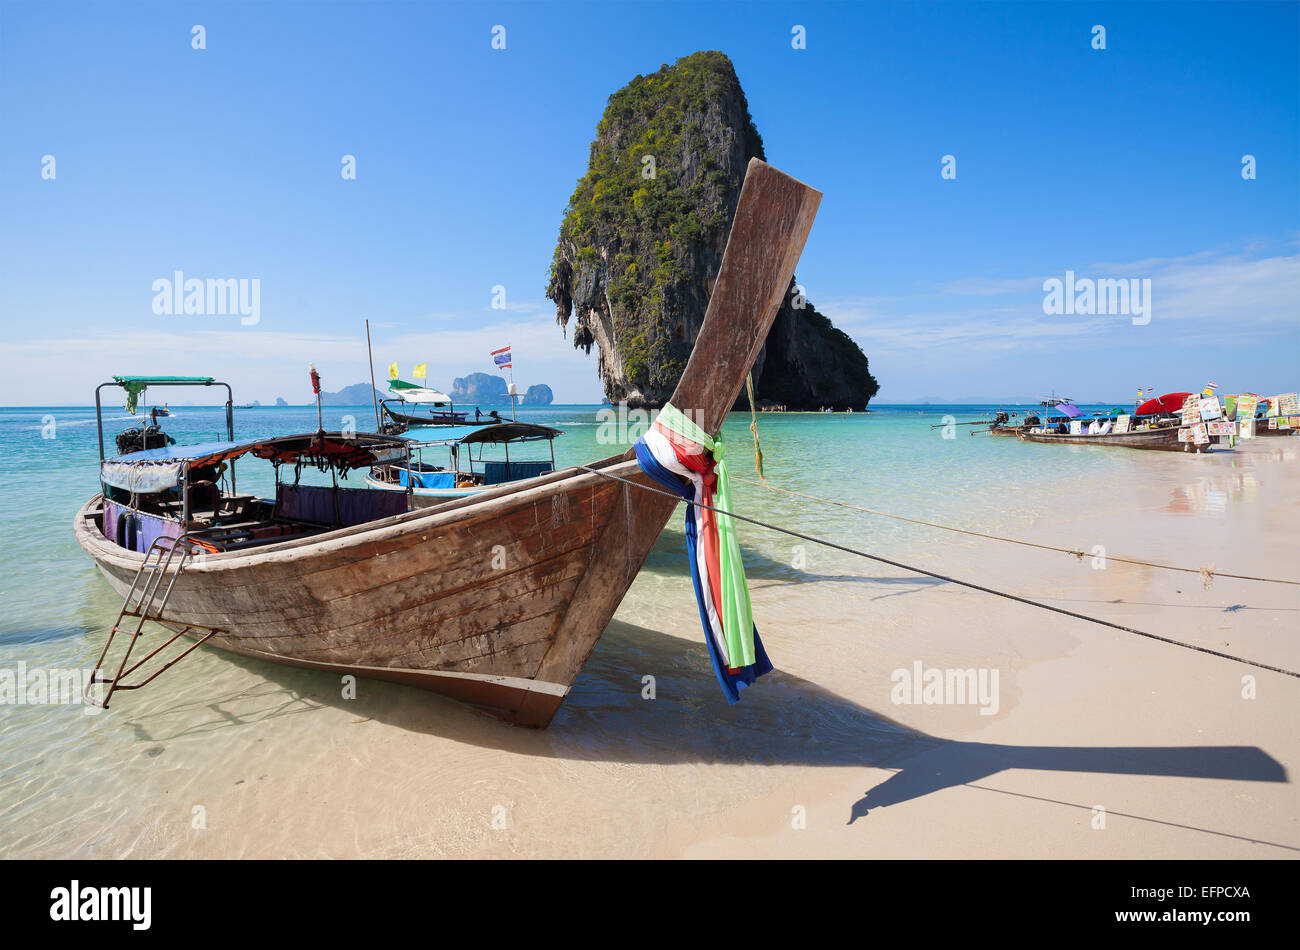 Wooden boats on the Railay beach, Thailand. Stock Photo